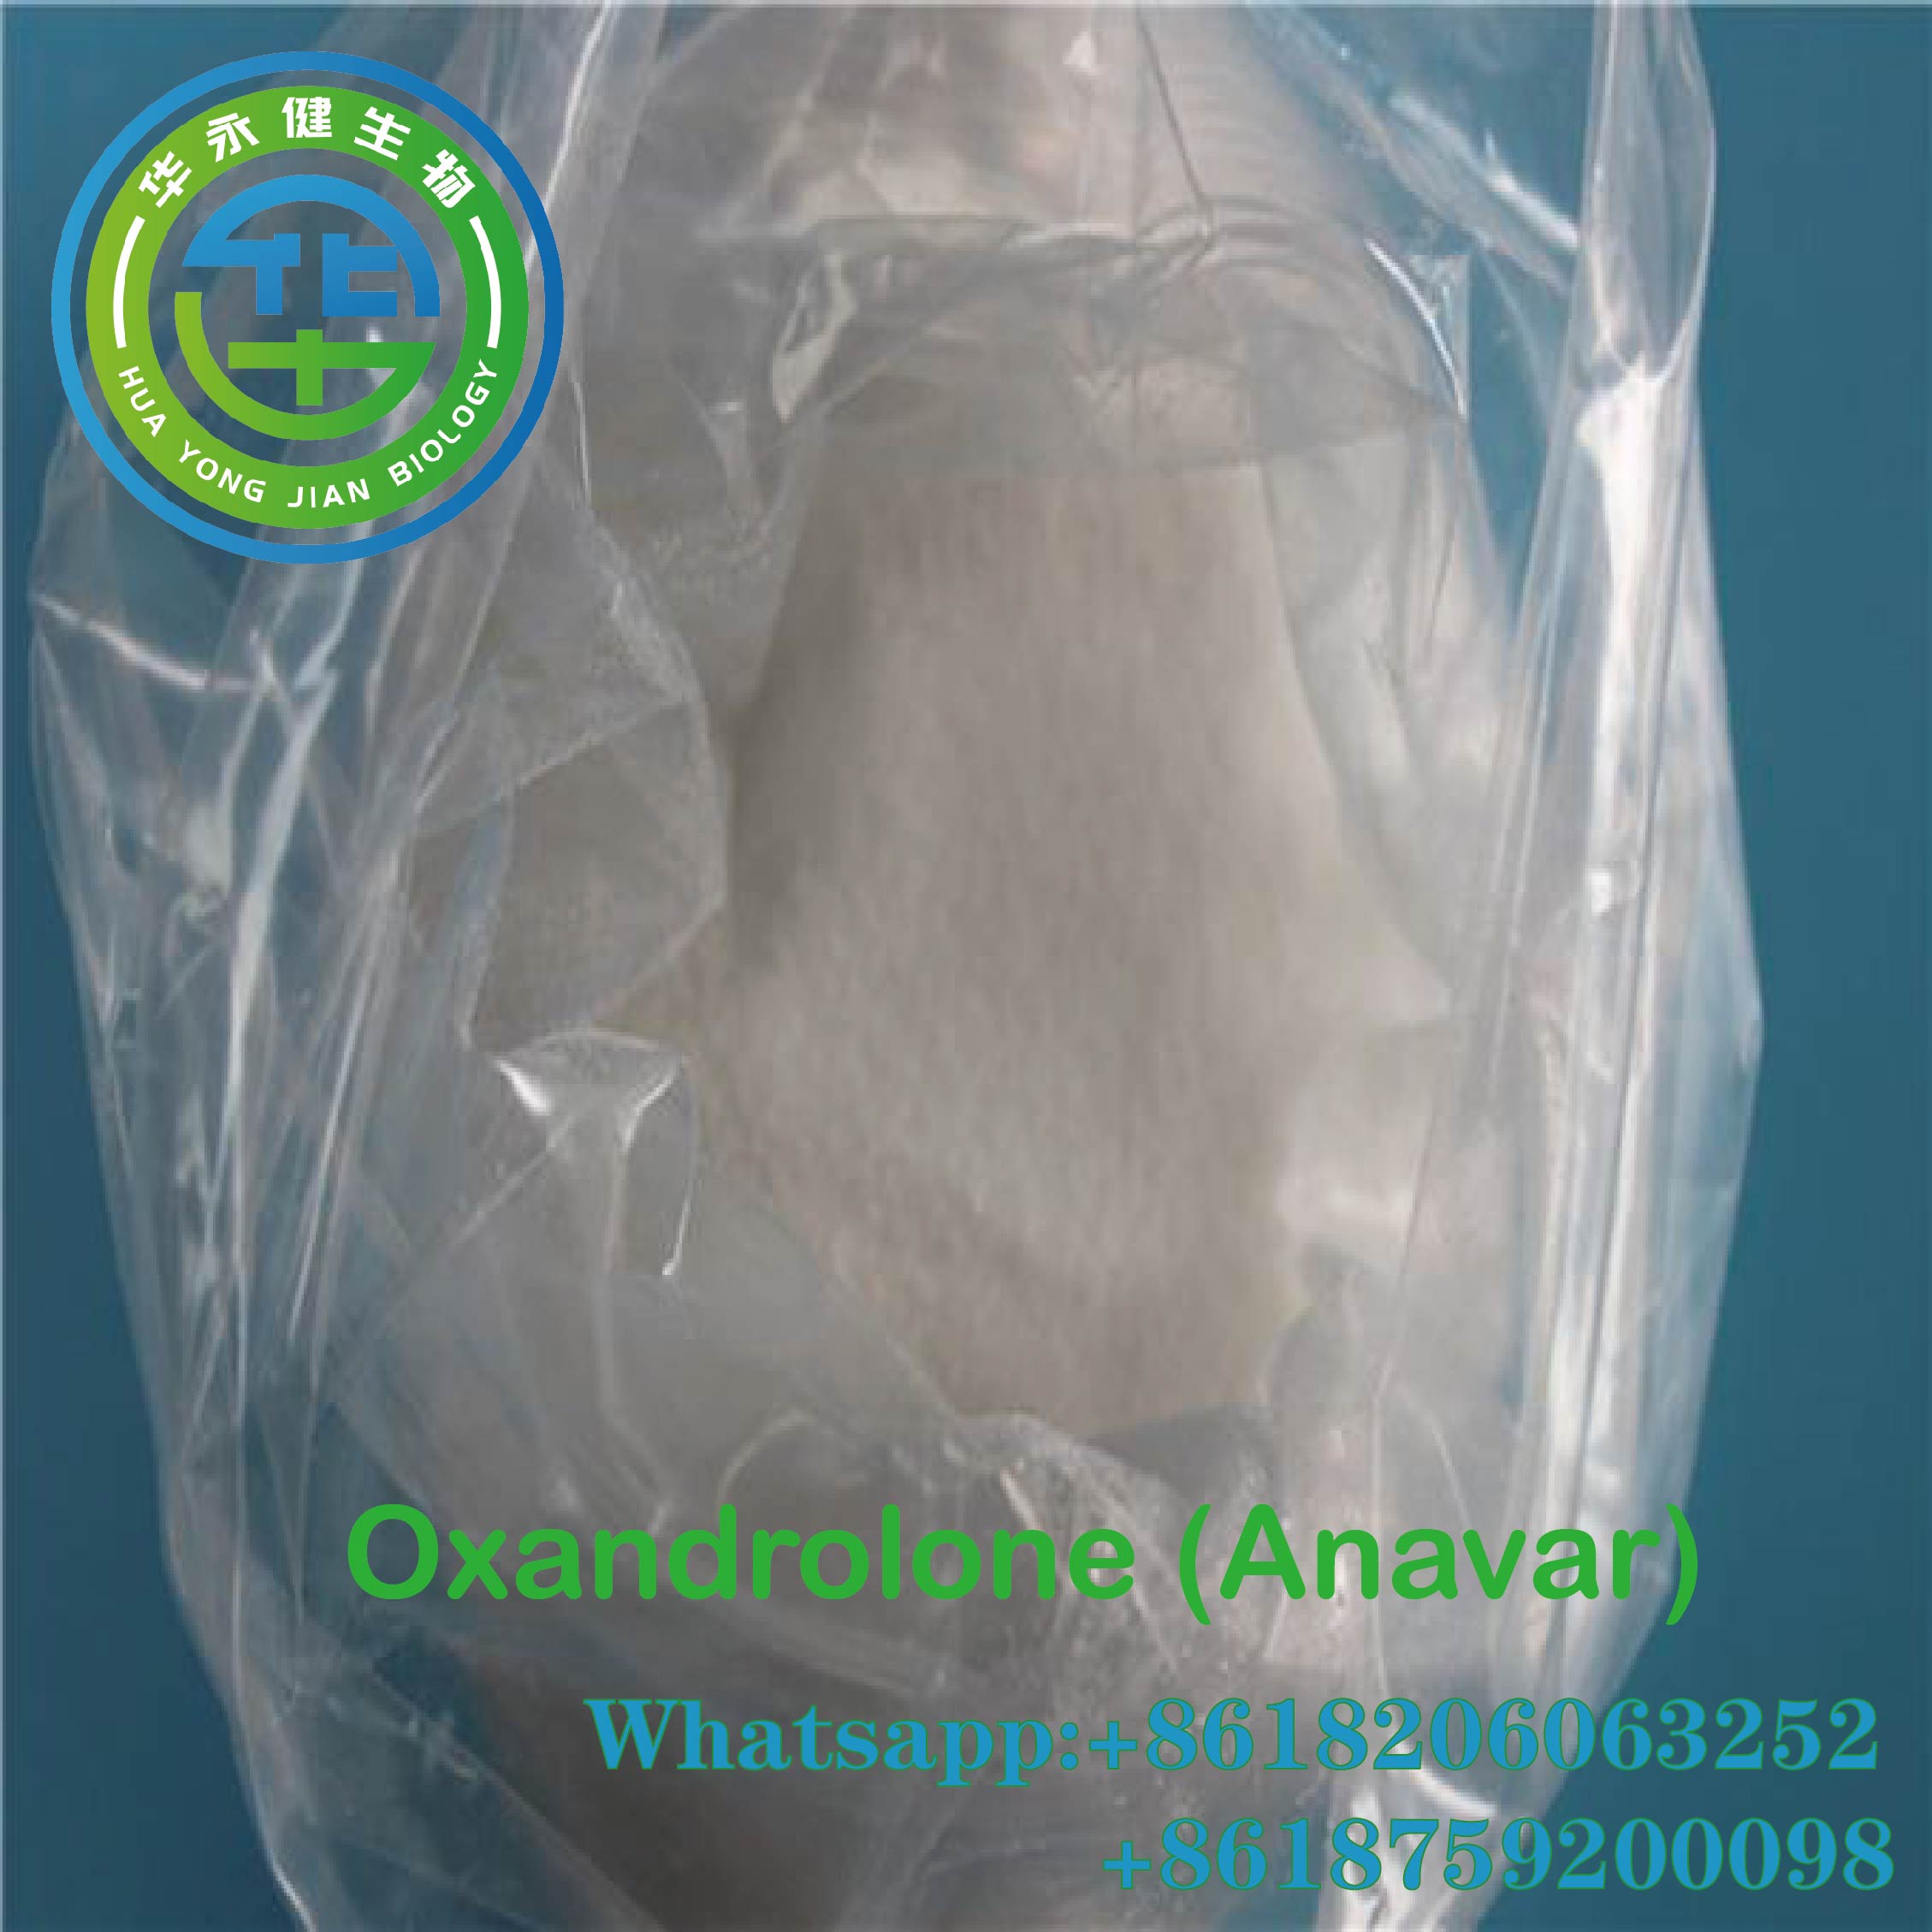 Safe Shipping Oxandrolone Raw Steroids OXA Powder Anavar for Muscle Growth CasNO.53-39-4